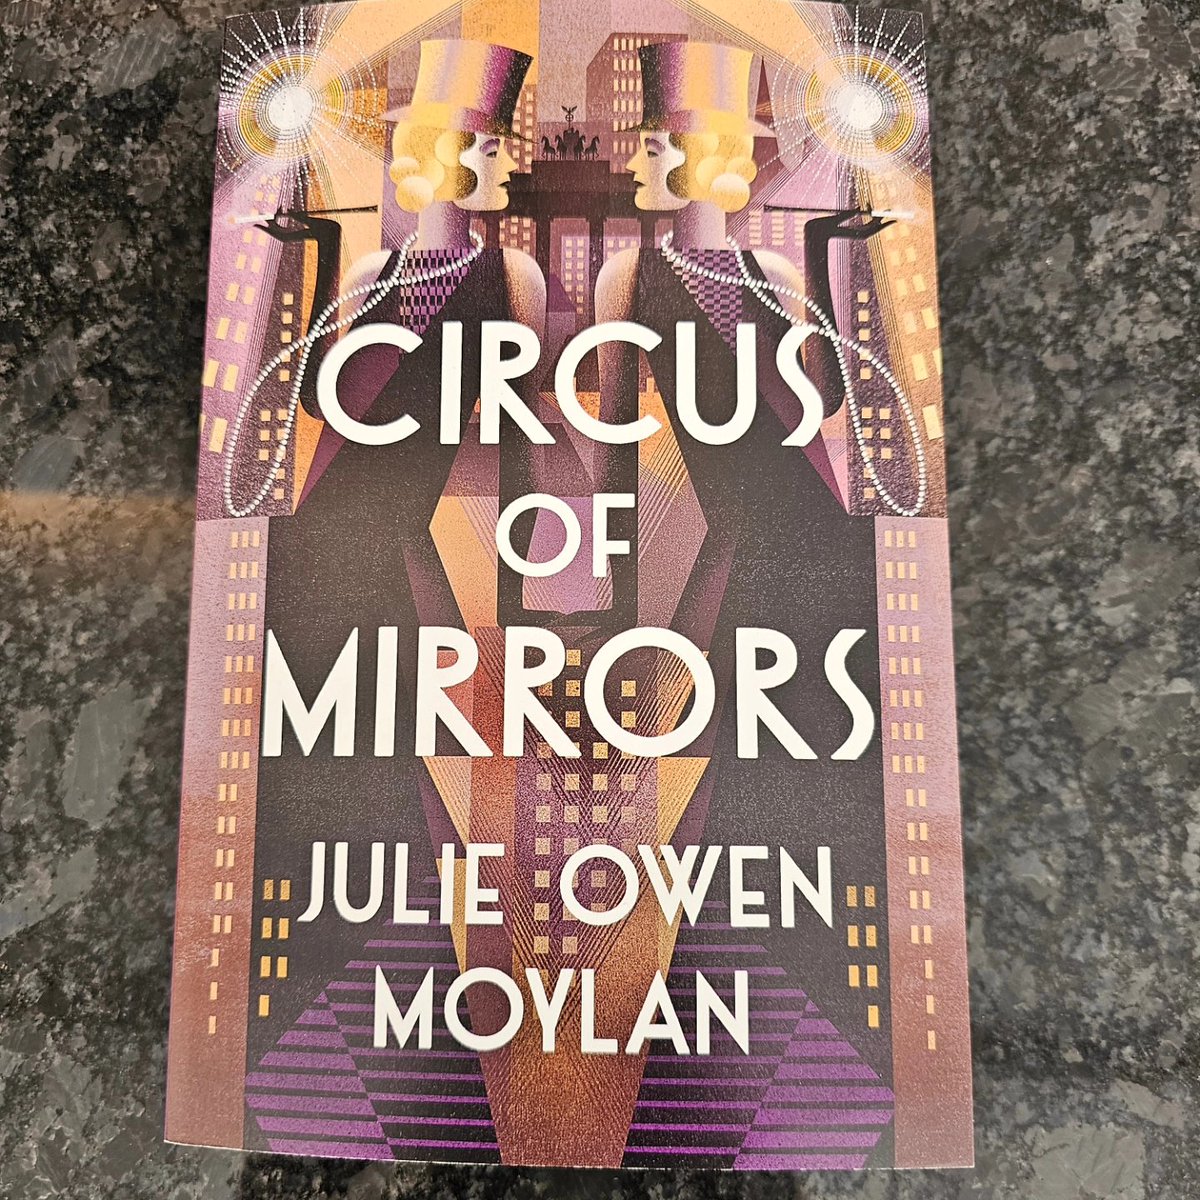 Thank you so much @MichaelJBooks for this amazing #bookpost I can't wait to read #CircusOfMirrors @JulieOwenMoylan Published 12th September #bookbloggers #booktwitter #bookX